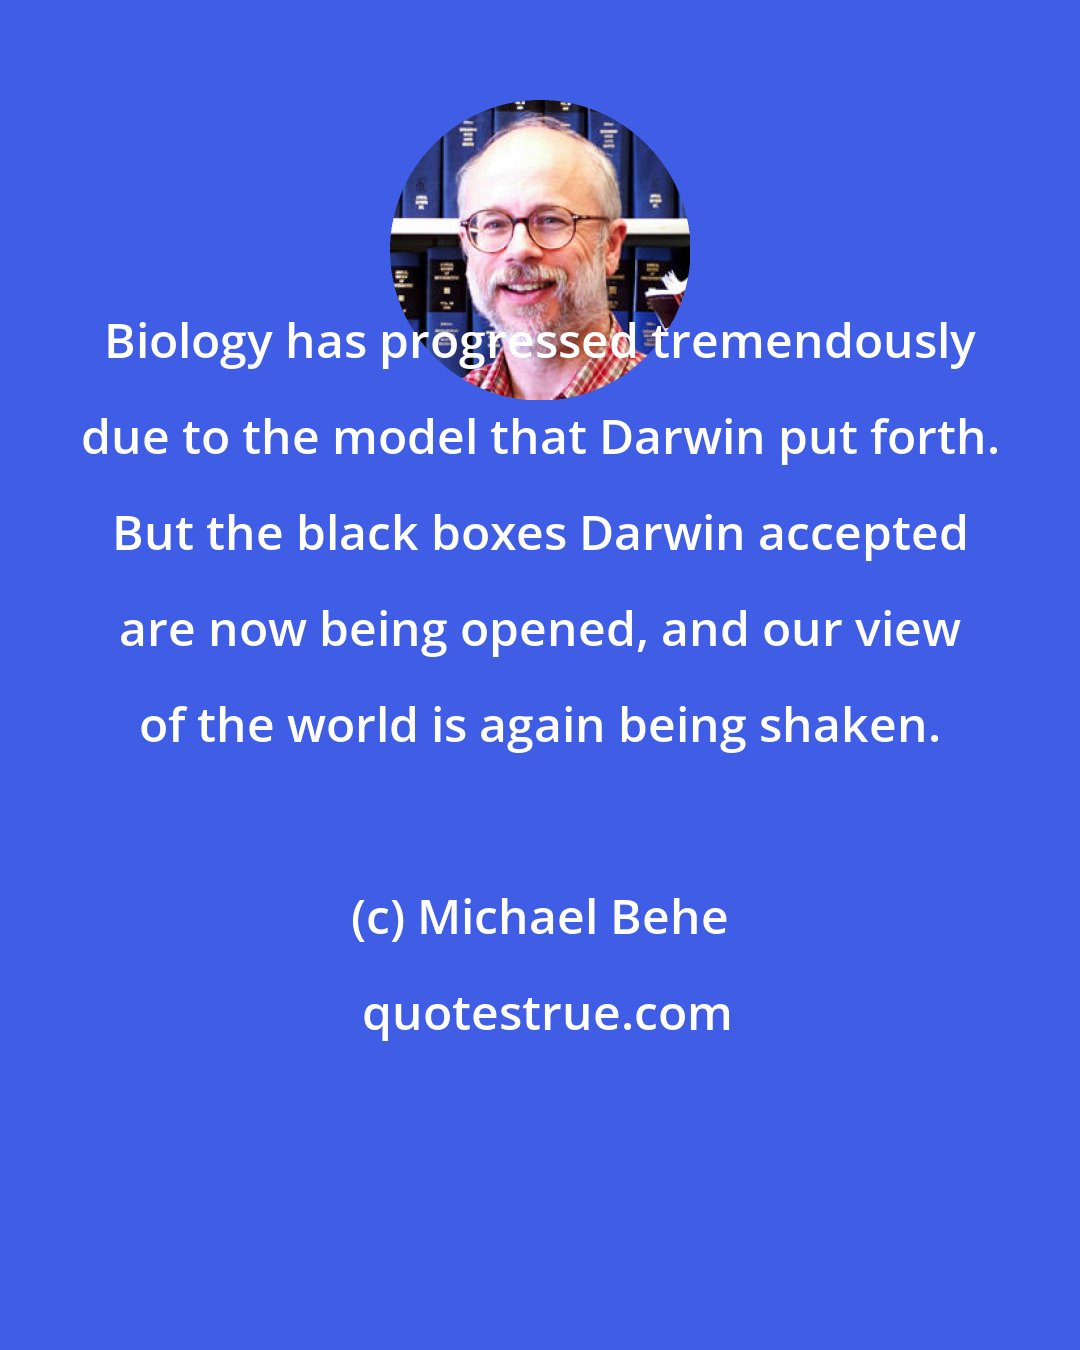 Michael Behe: Biology has progressed tremendously due to the model that Darwin put forth. But the black boxes Darwin accepted are now being opened, and our view of the world is again being shaken.